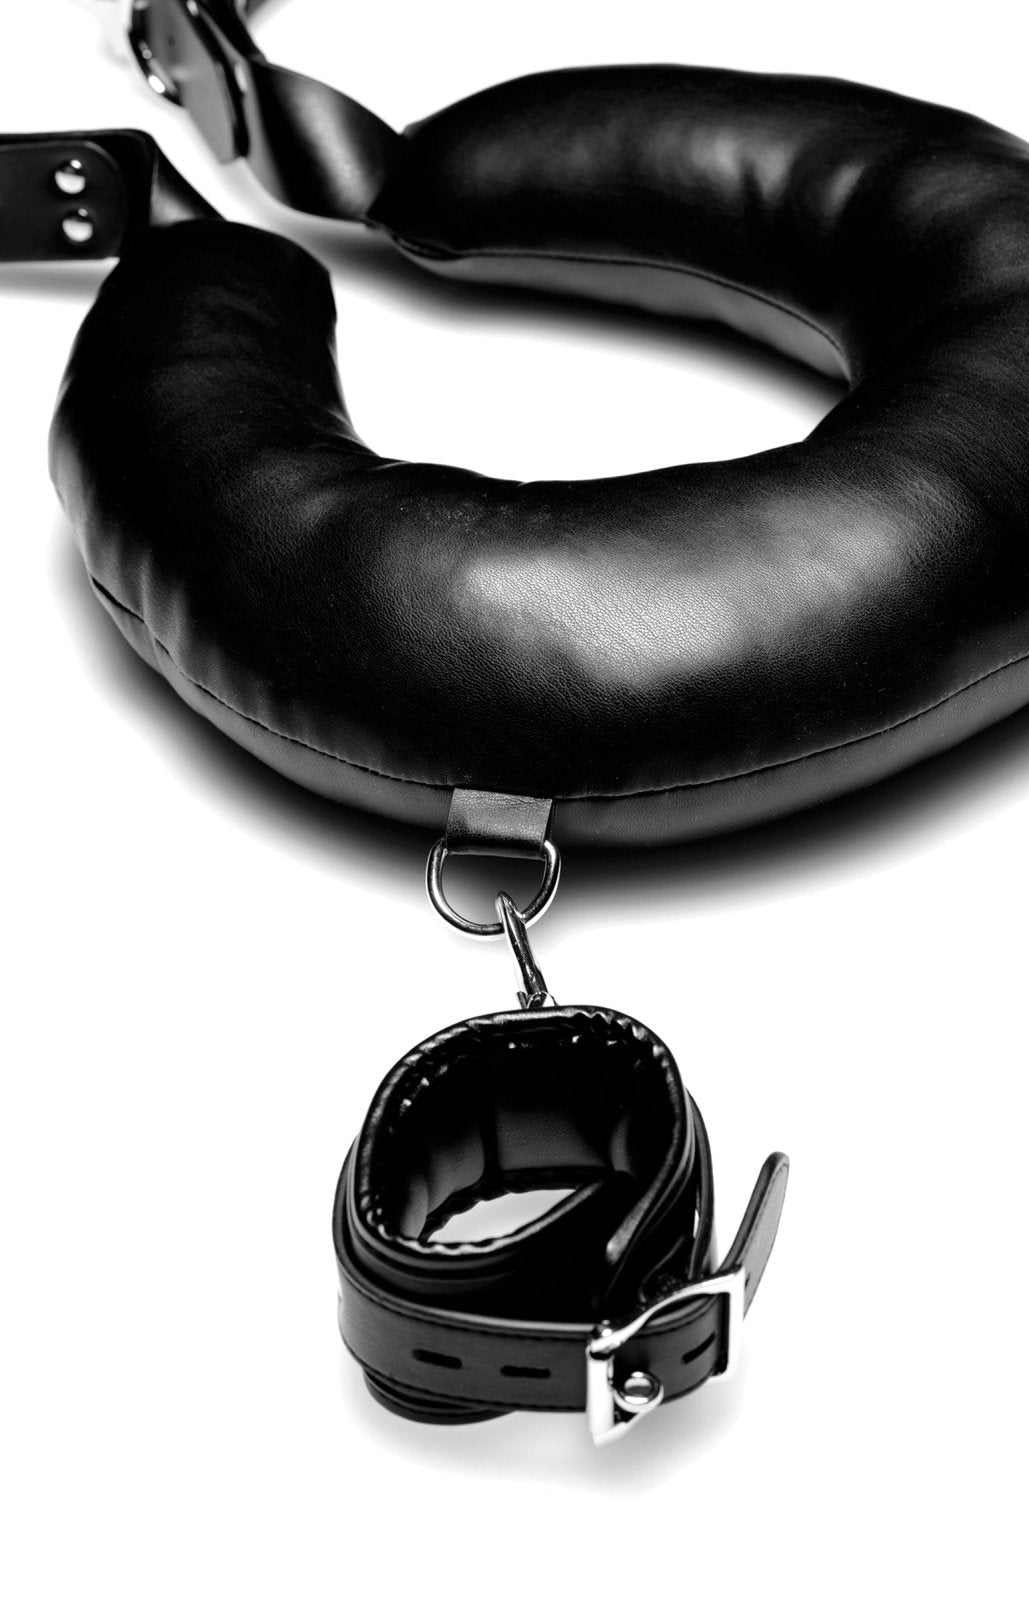 Padded Thigh Sling Restraint with Wrist Cuffs - Kink Store